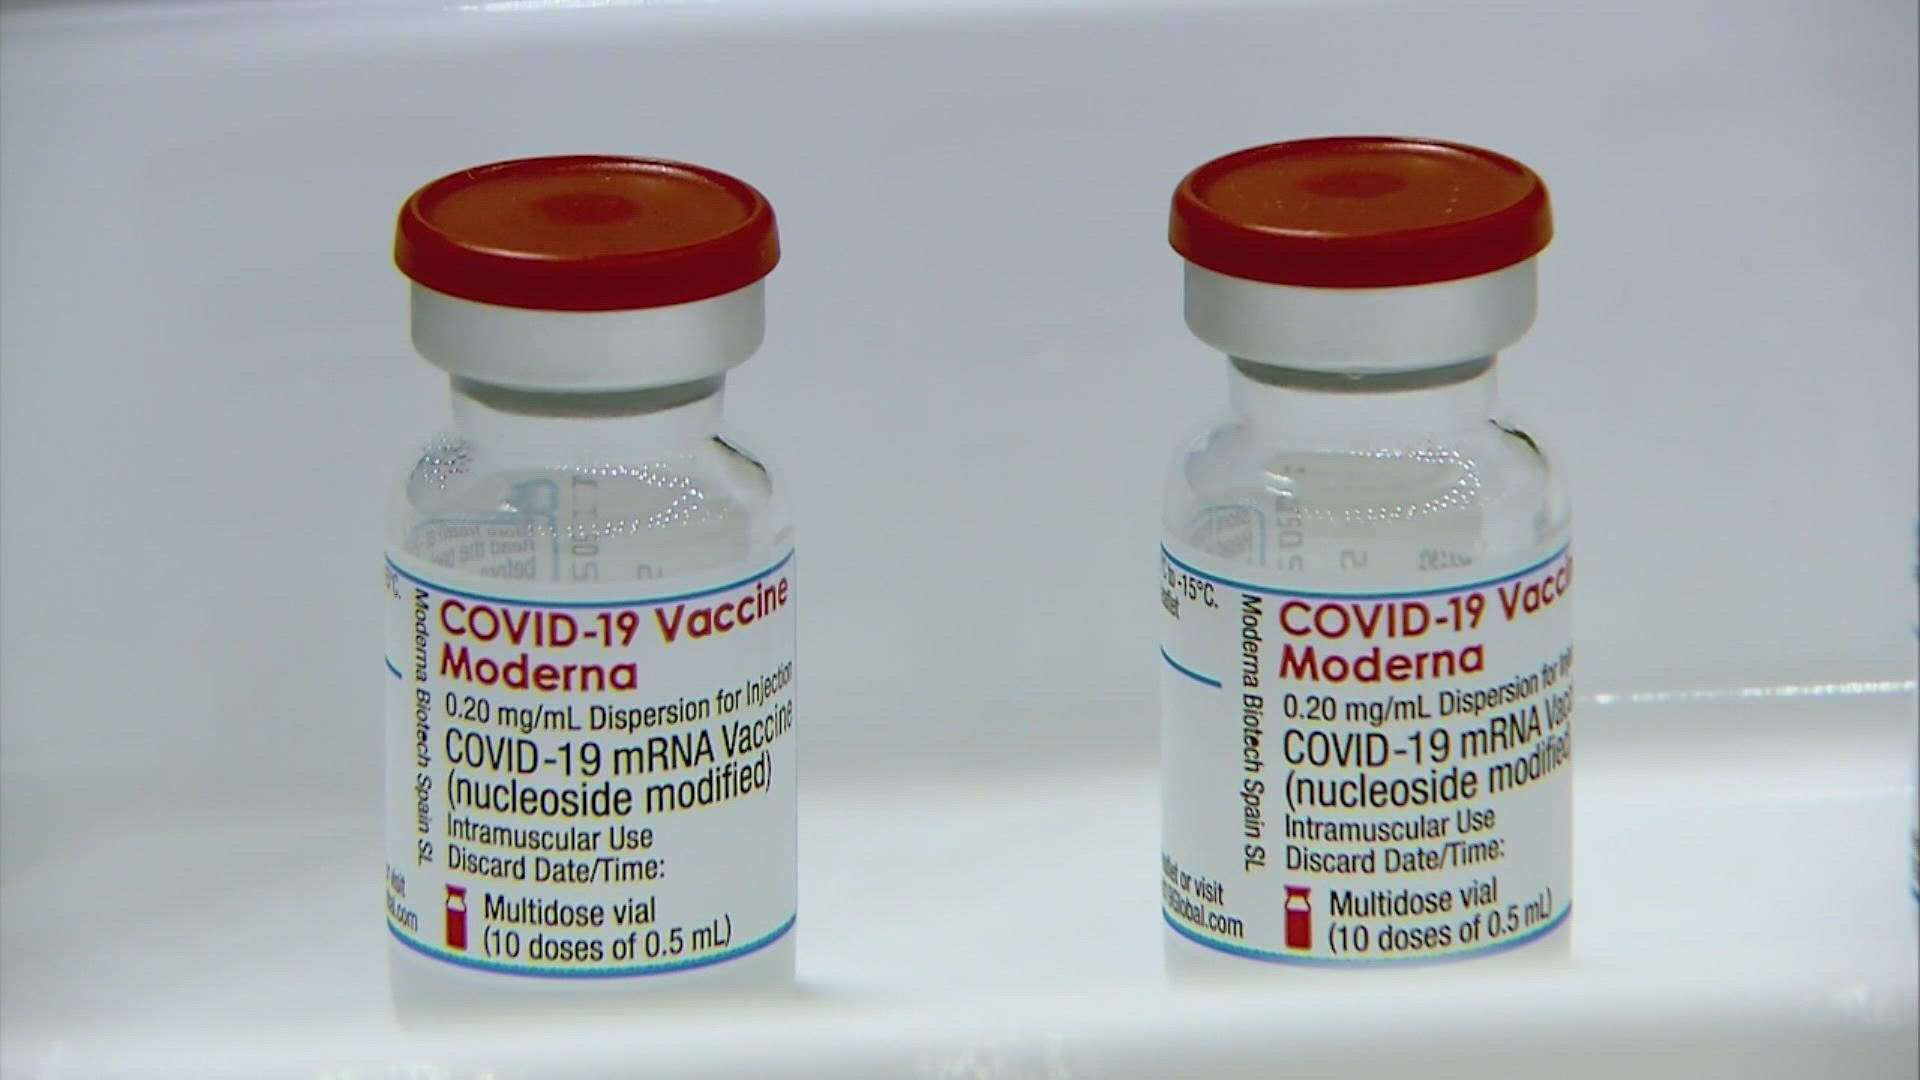 The state health department said 585 people received expired Moderna vaccines from Bloom between September and May.